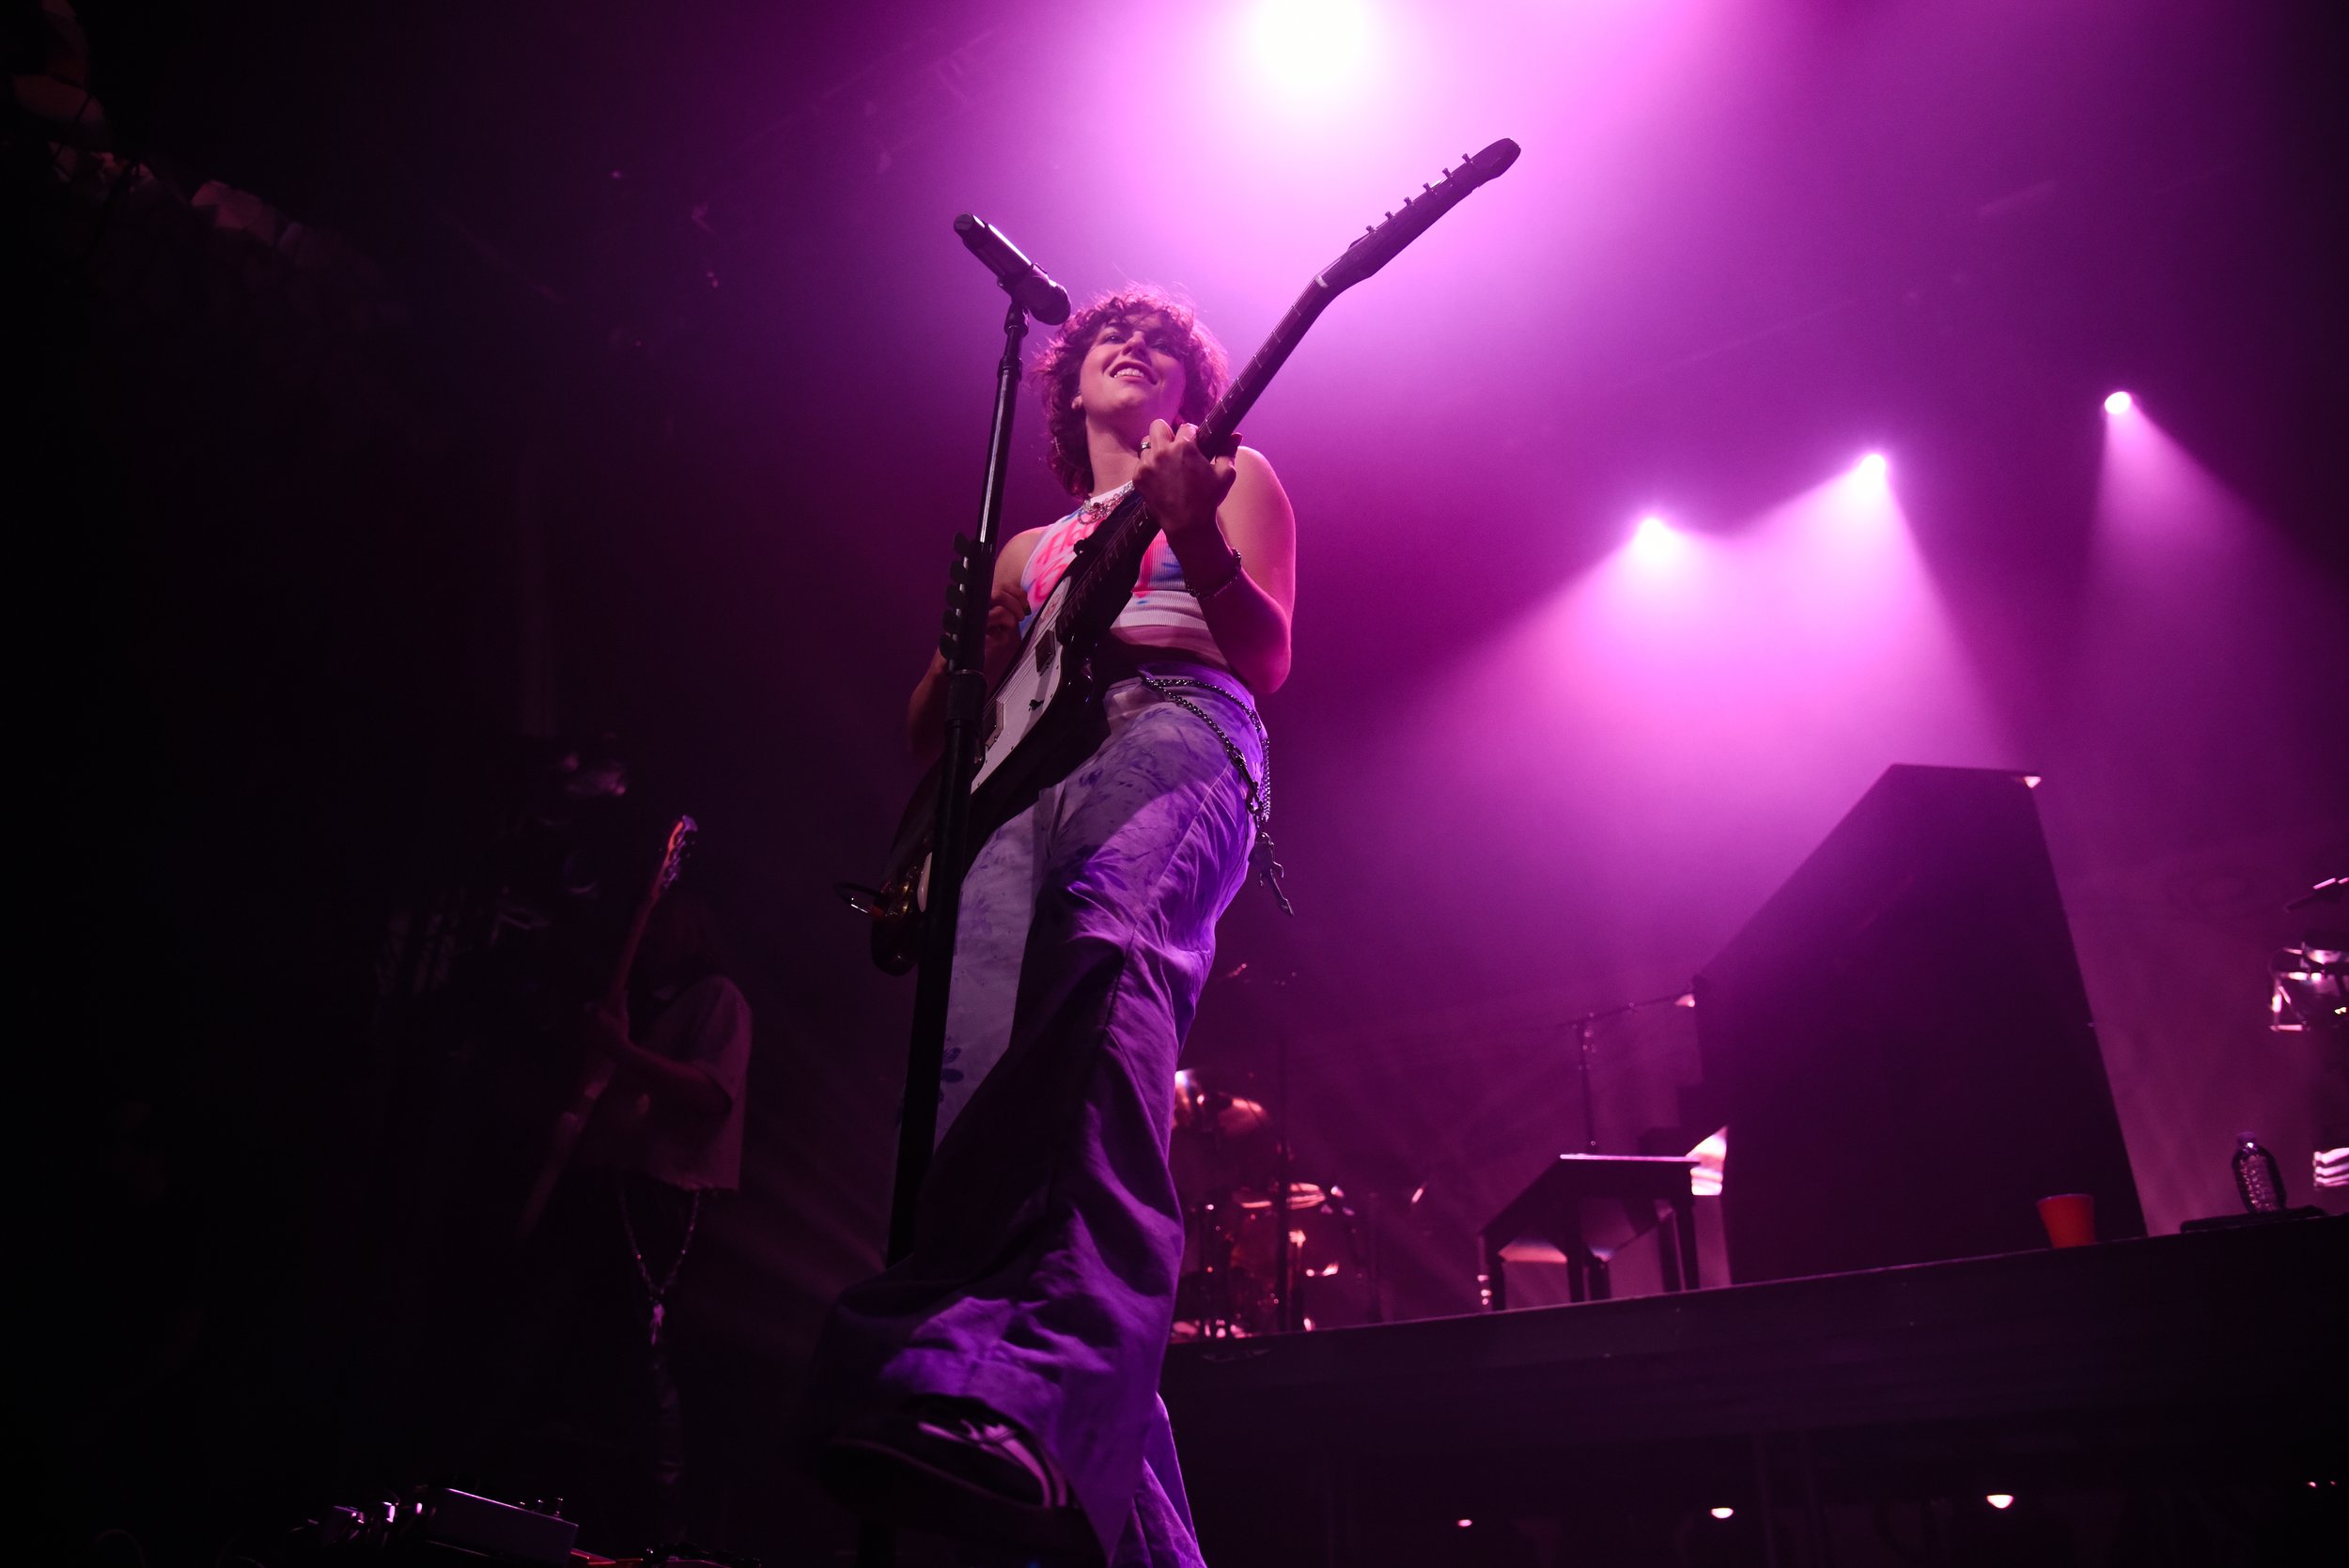  King Princess leans back, kicking out her leg while strumming her guitar. 